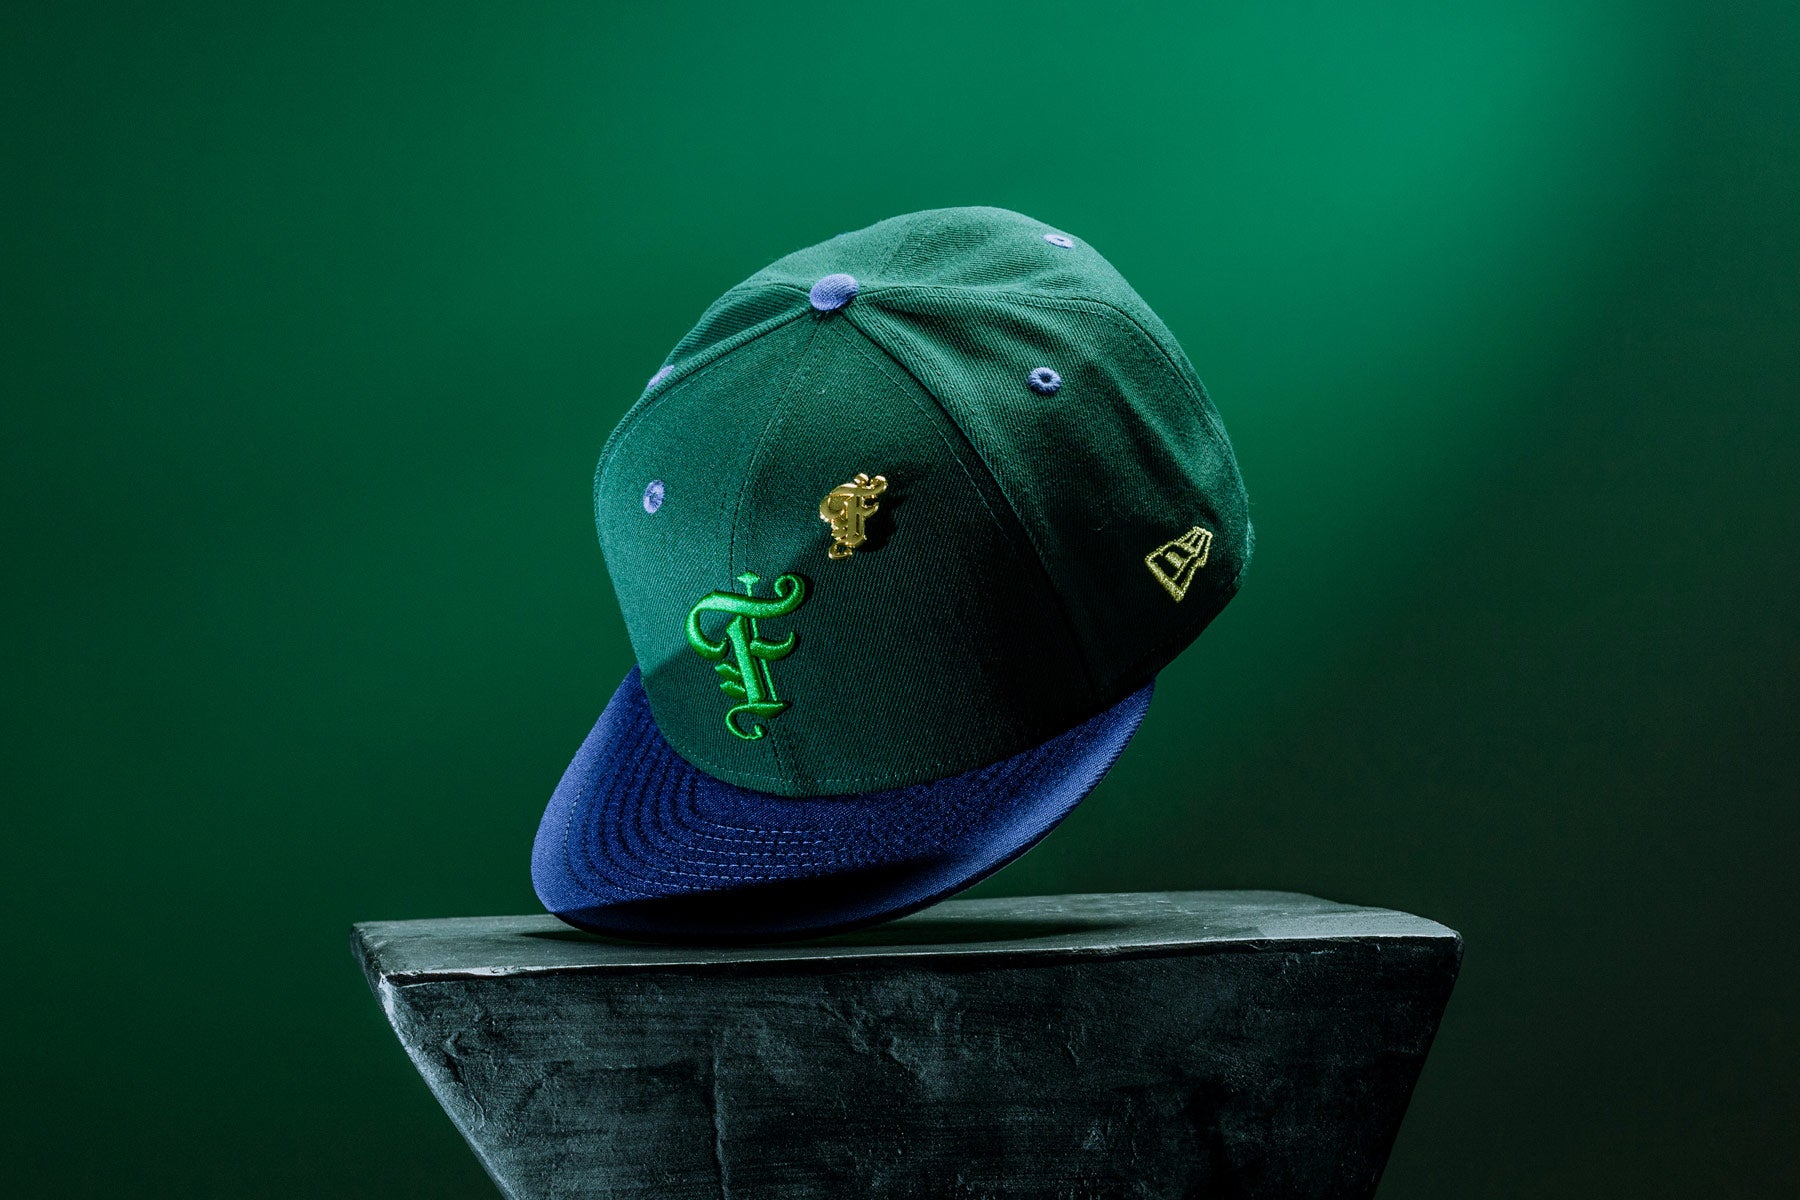 Hat Club Retro MLB World Series September 23 59Fifty Fitted Hat Collection  by MLB x New Era